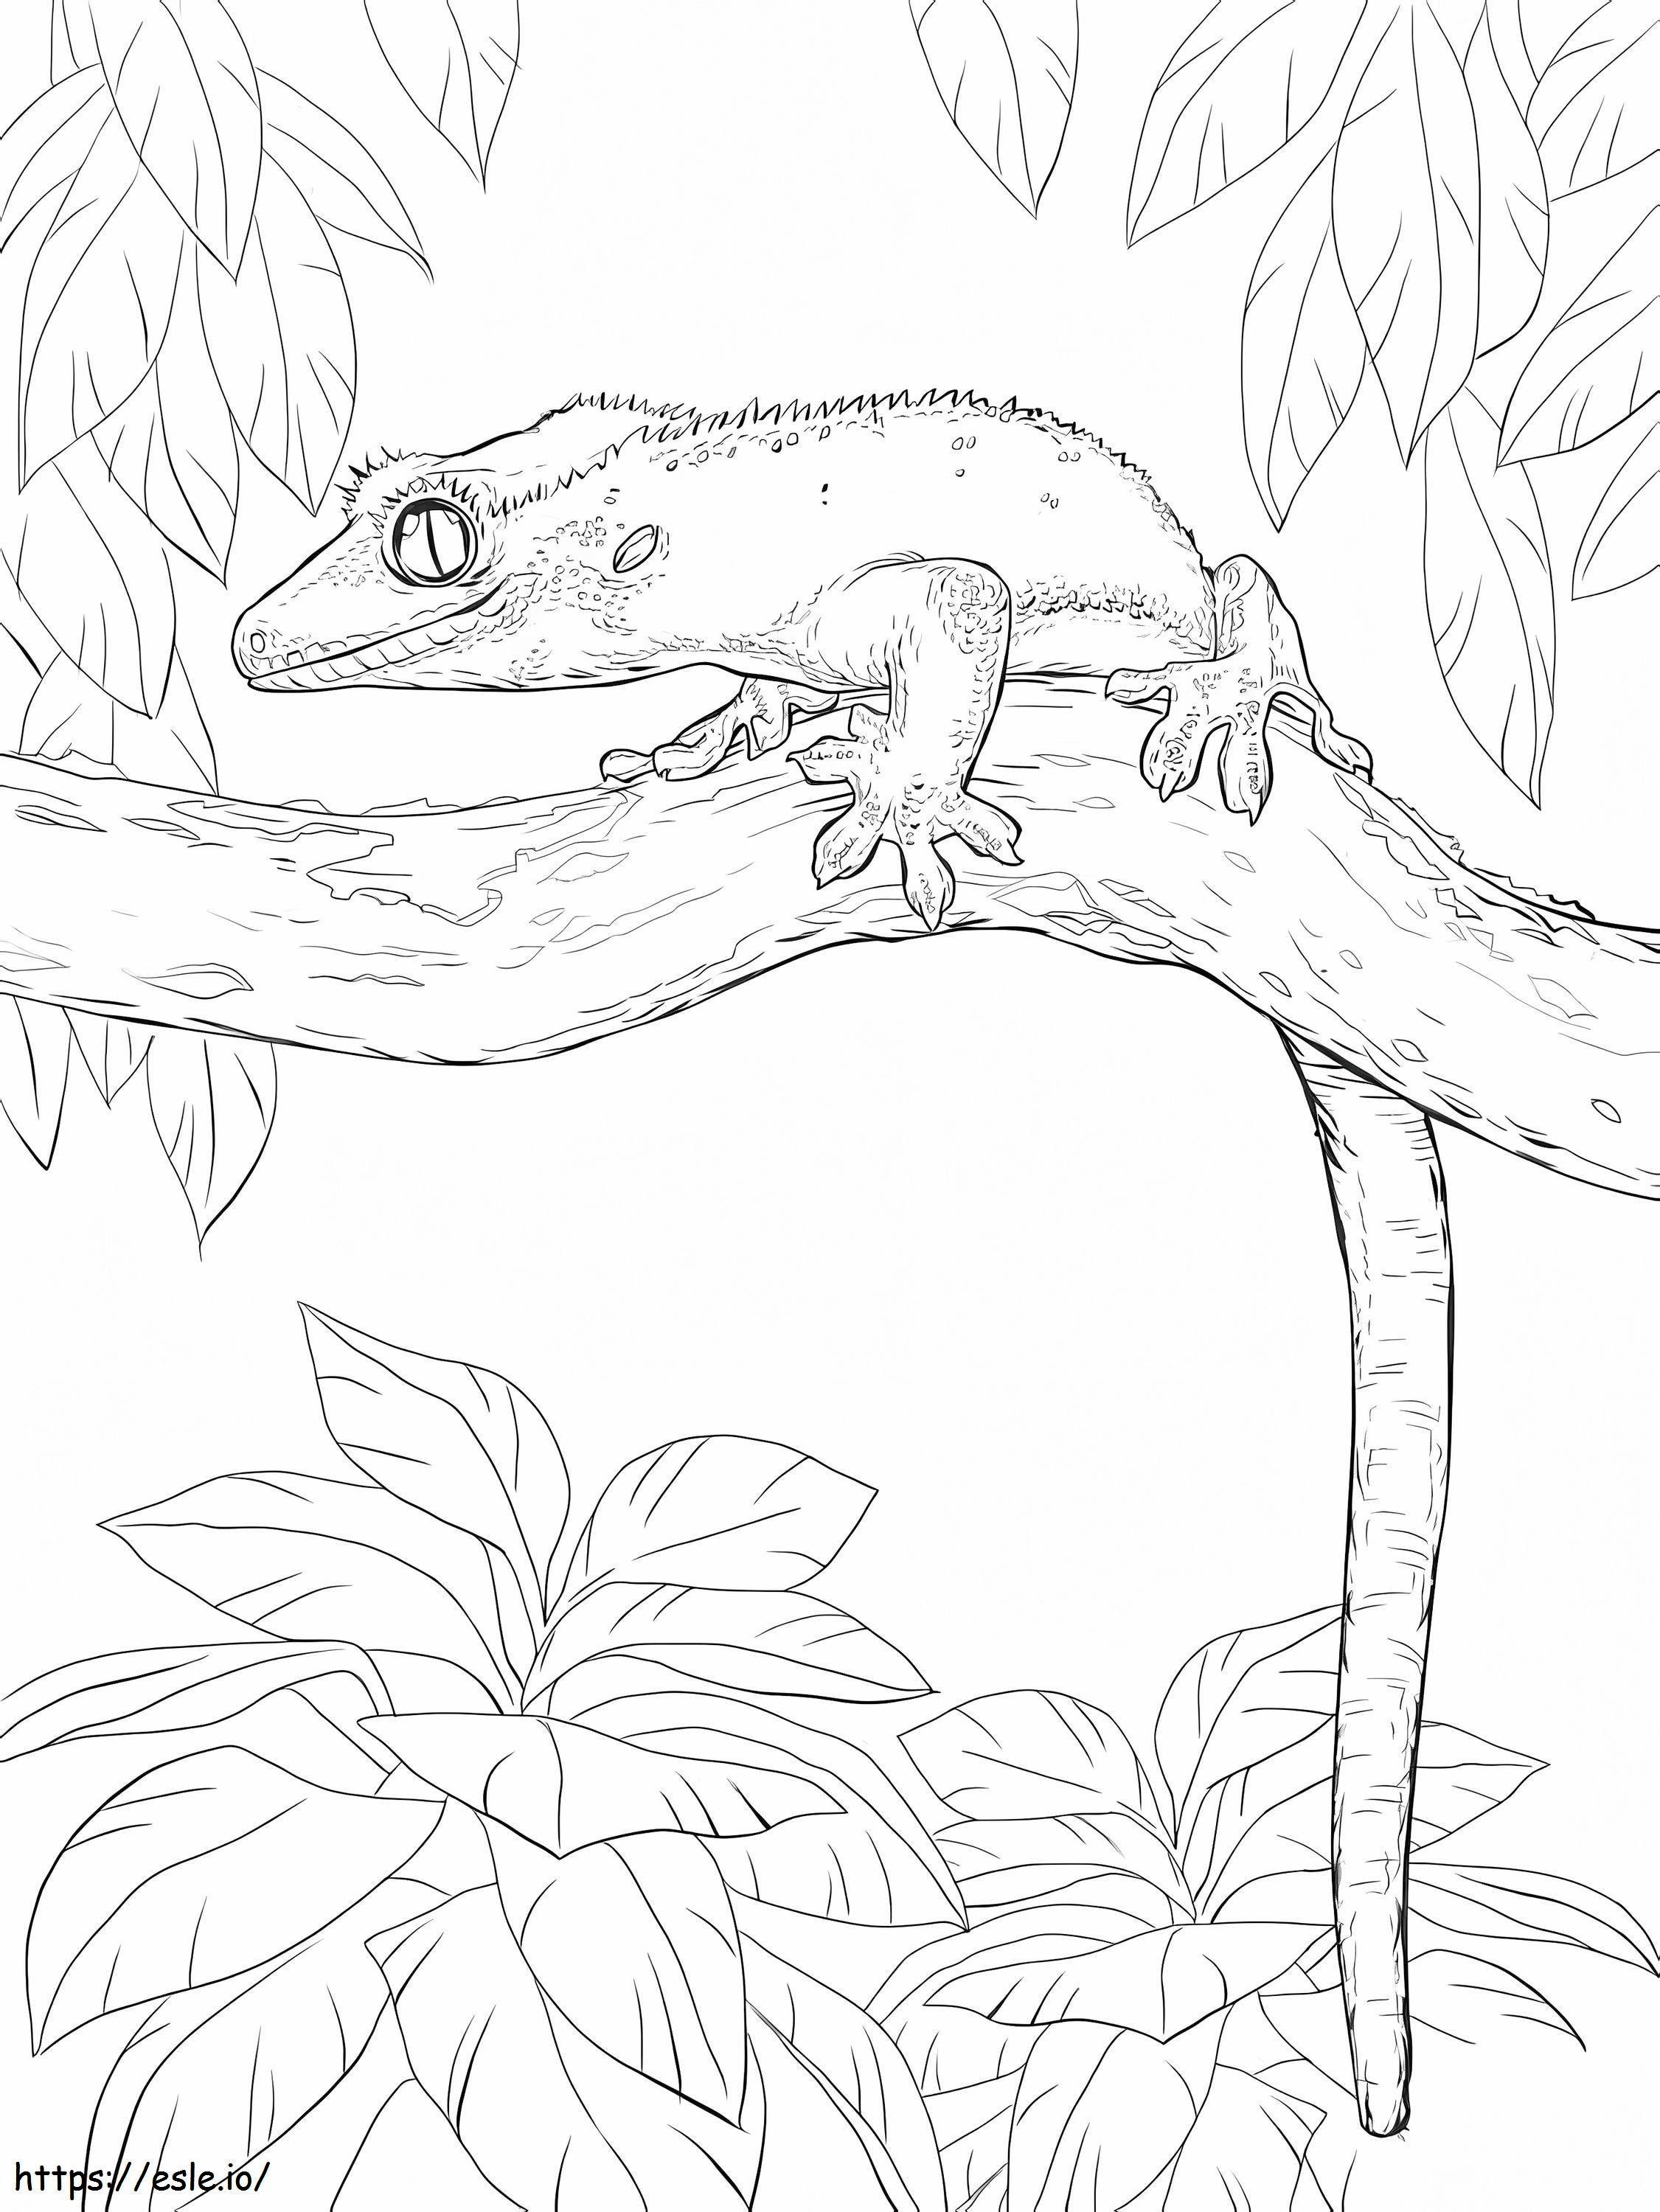 Crested Gecko coloring page